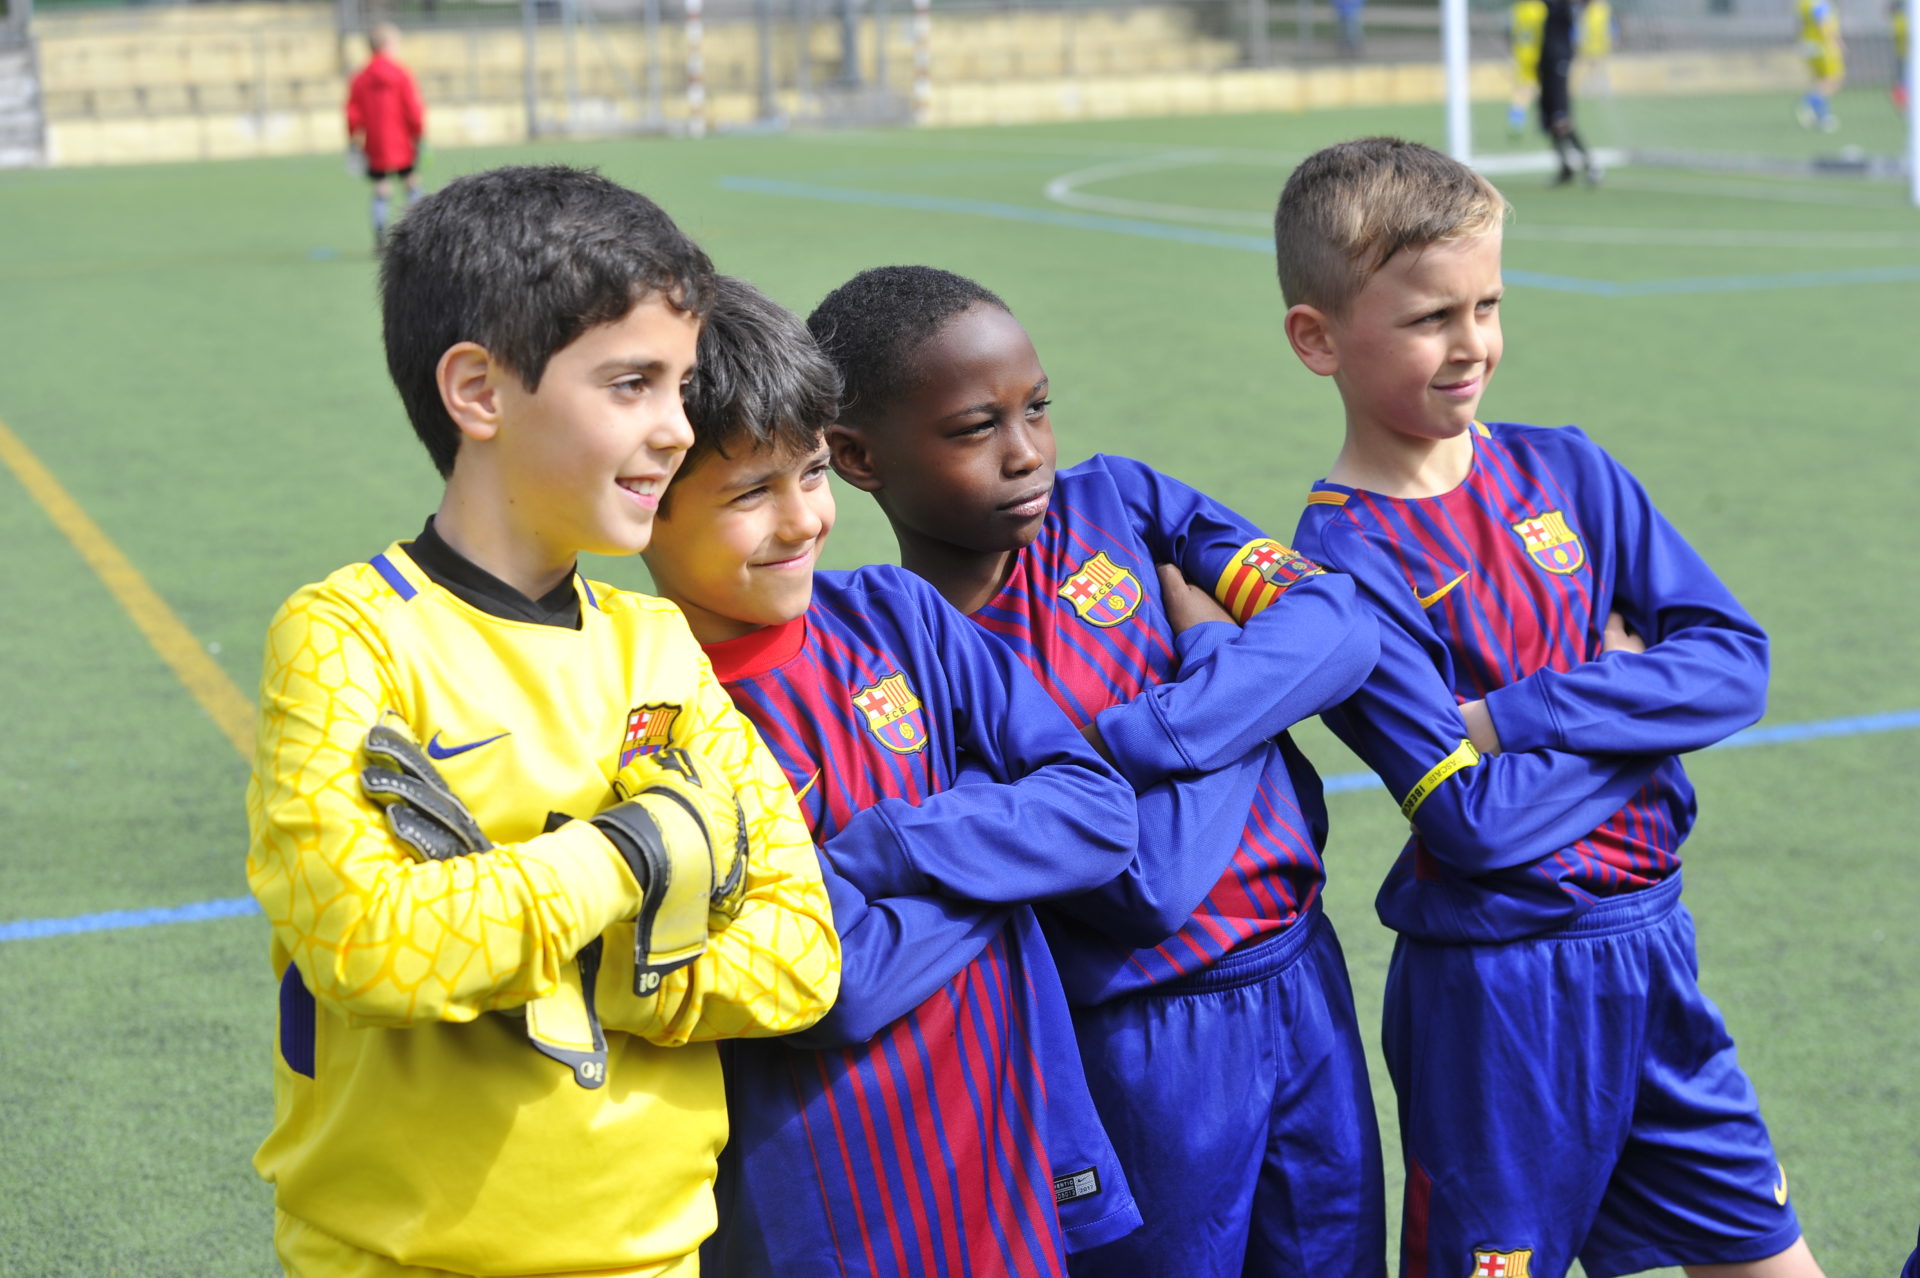 IberCup Cascais - Barcelona players - Road to Sport